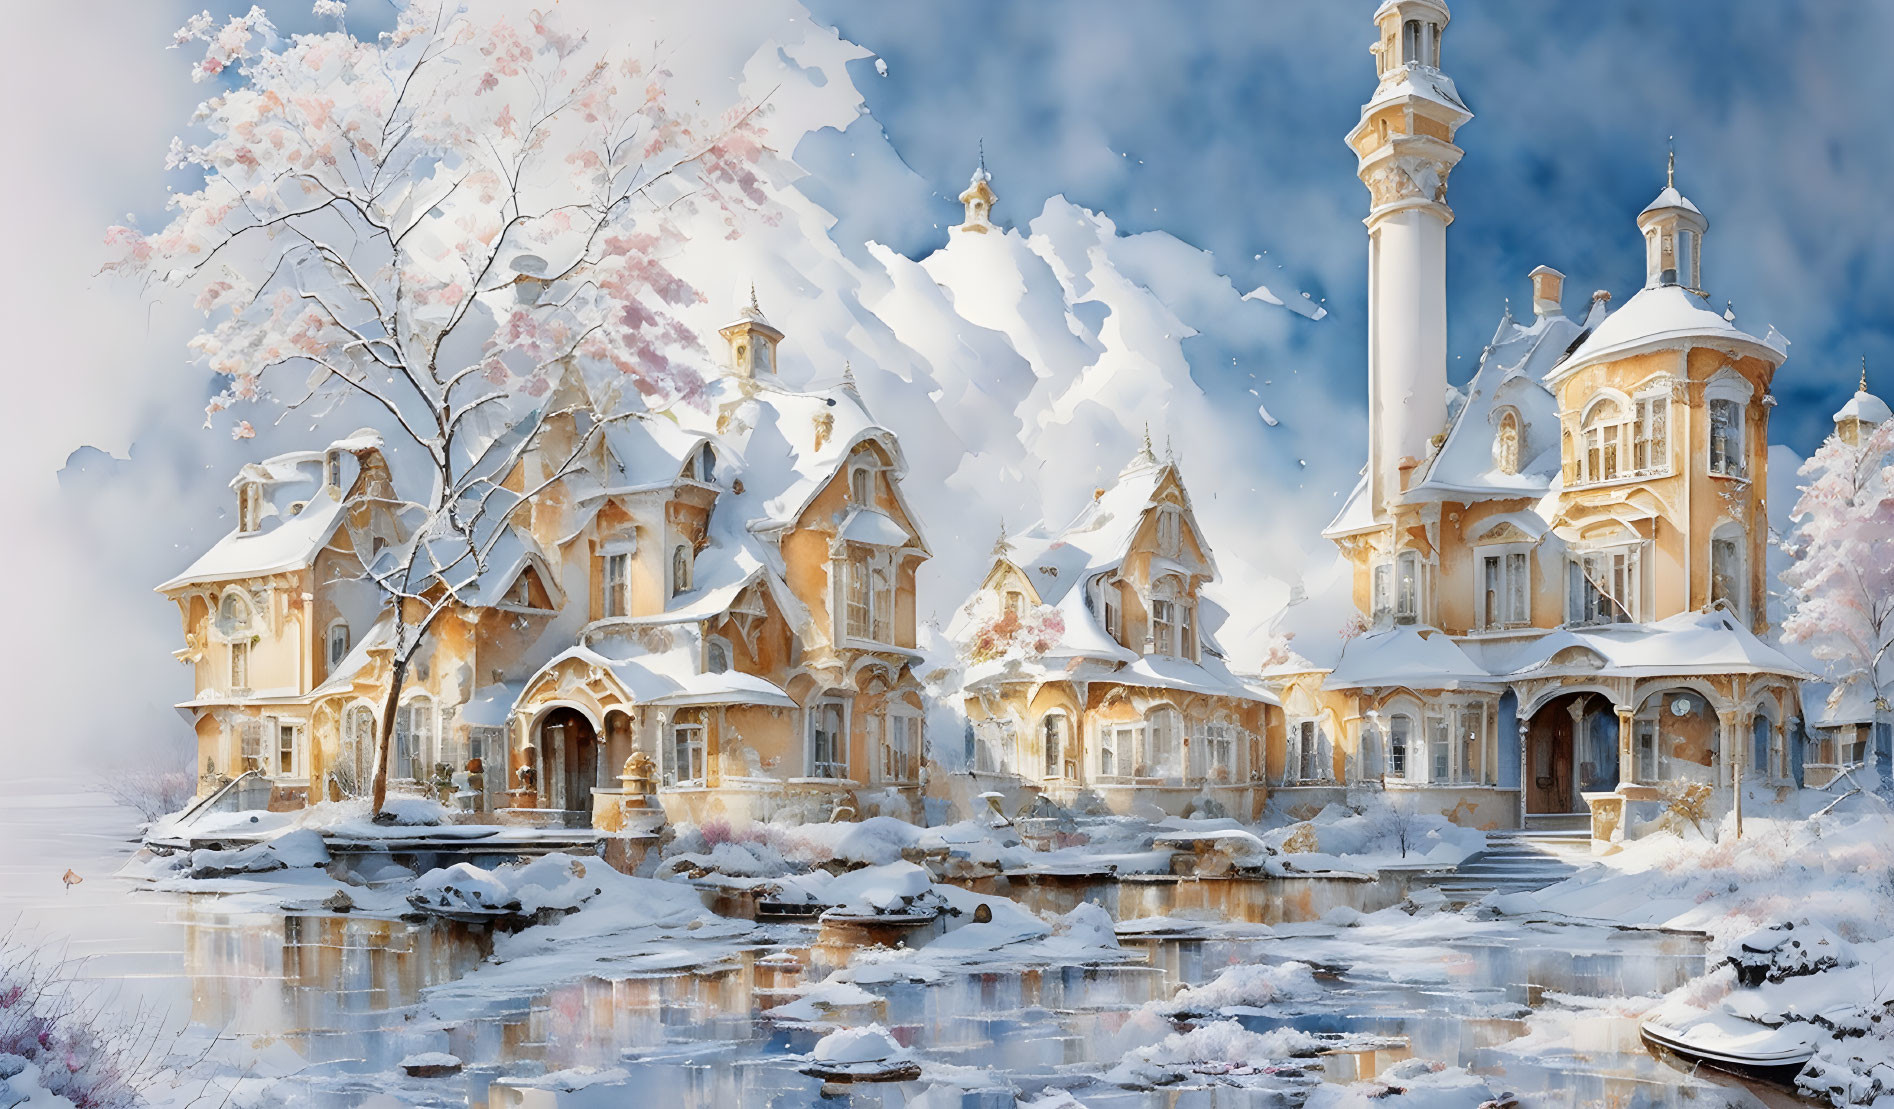 Snow-covered fairytale village with cherry blossoms and frozen river